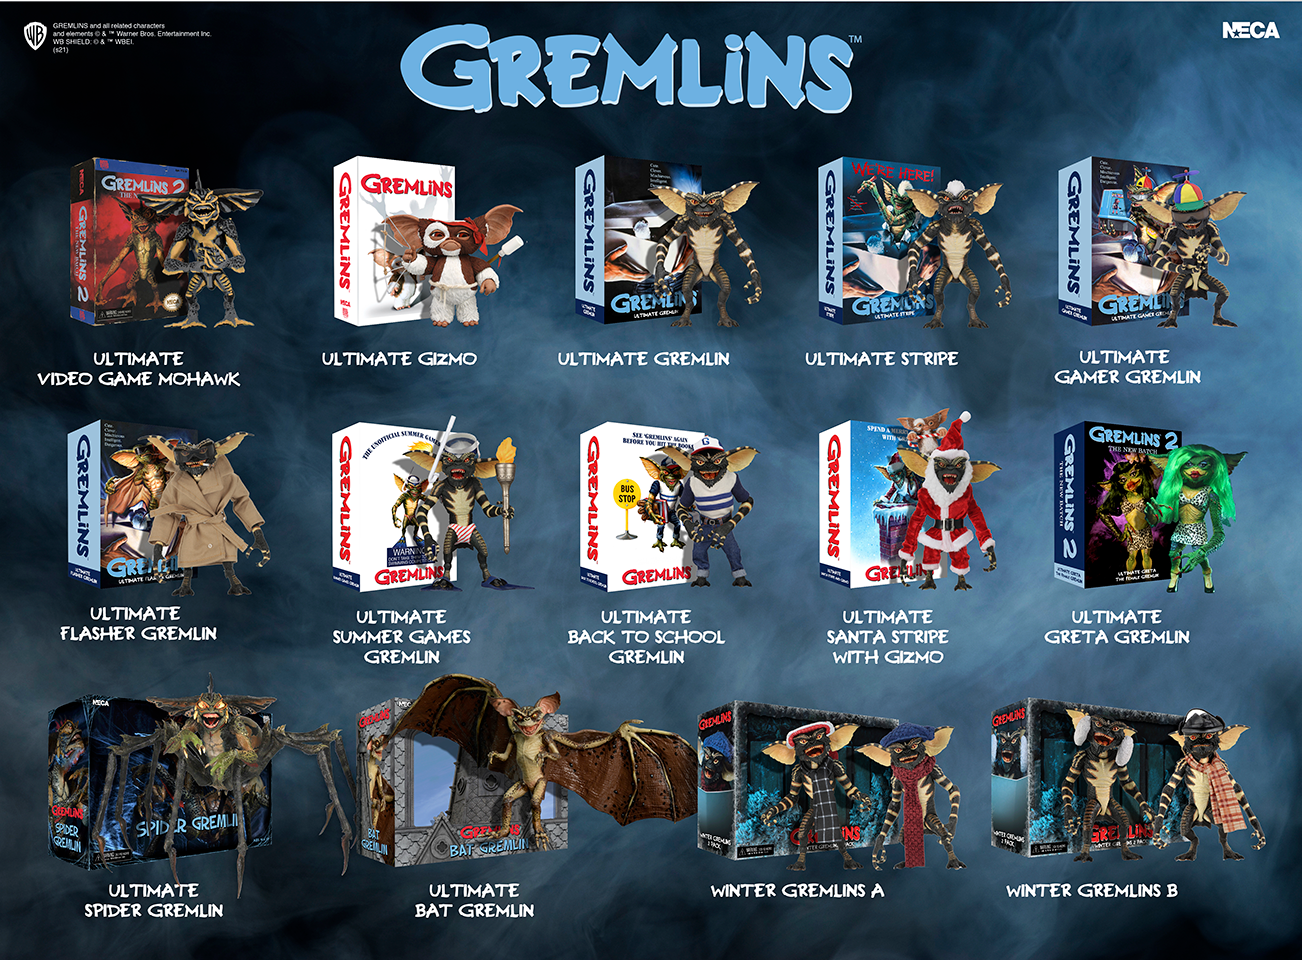 NECAOnline.com | 12 Days of Downloads 2020 – Day 8: Gremlins Visual Guide